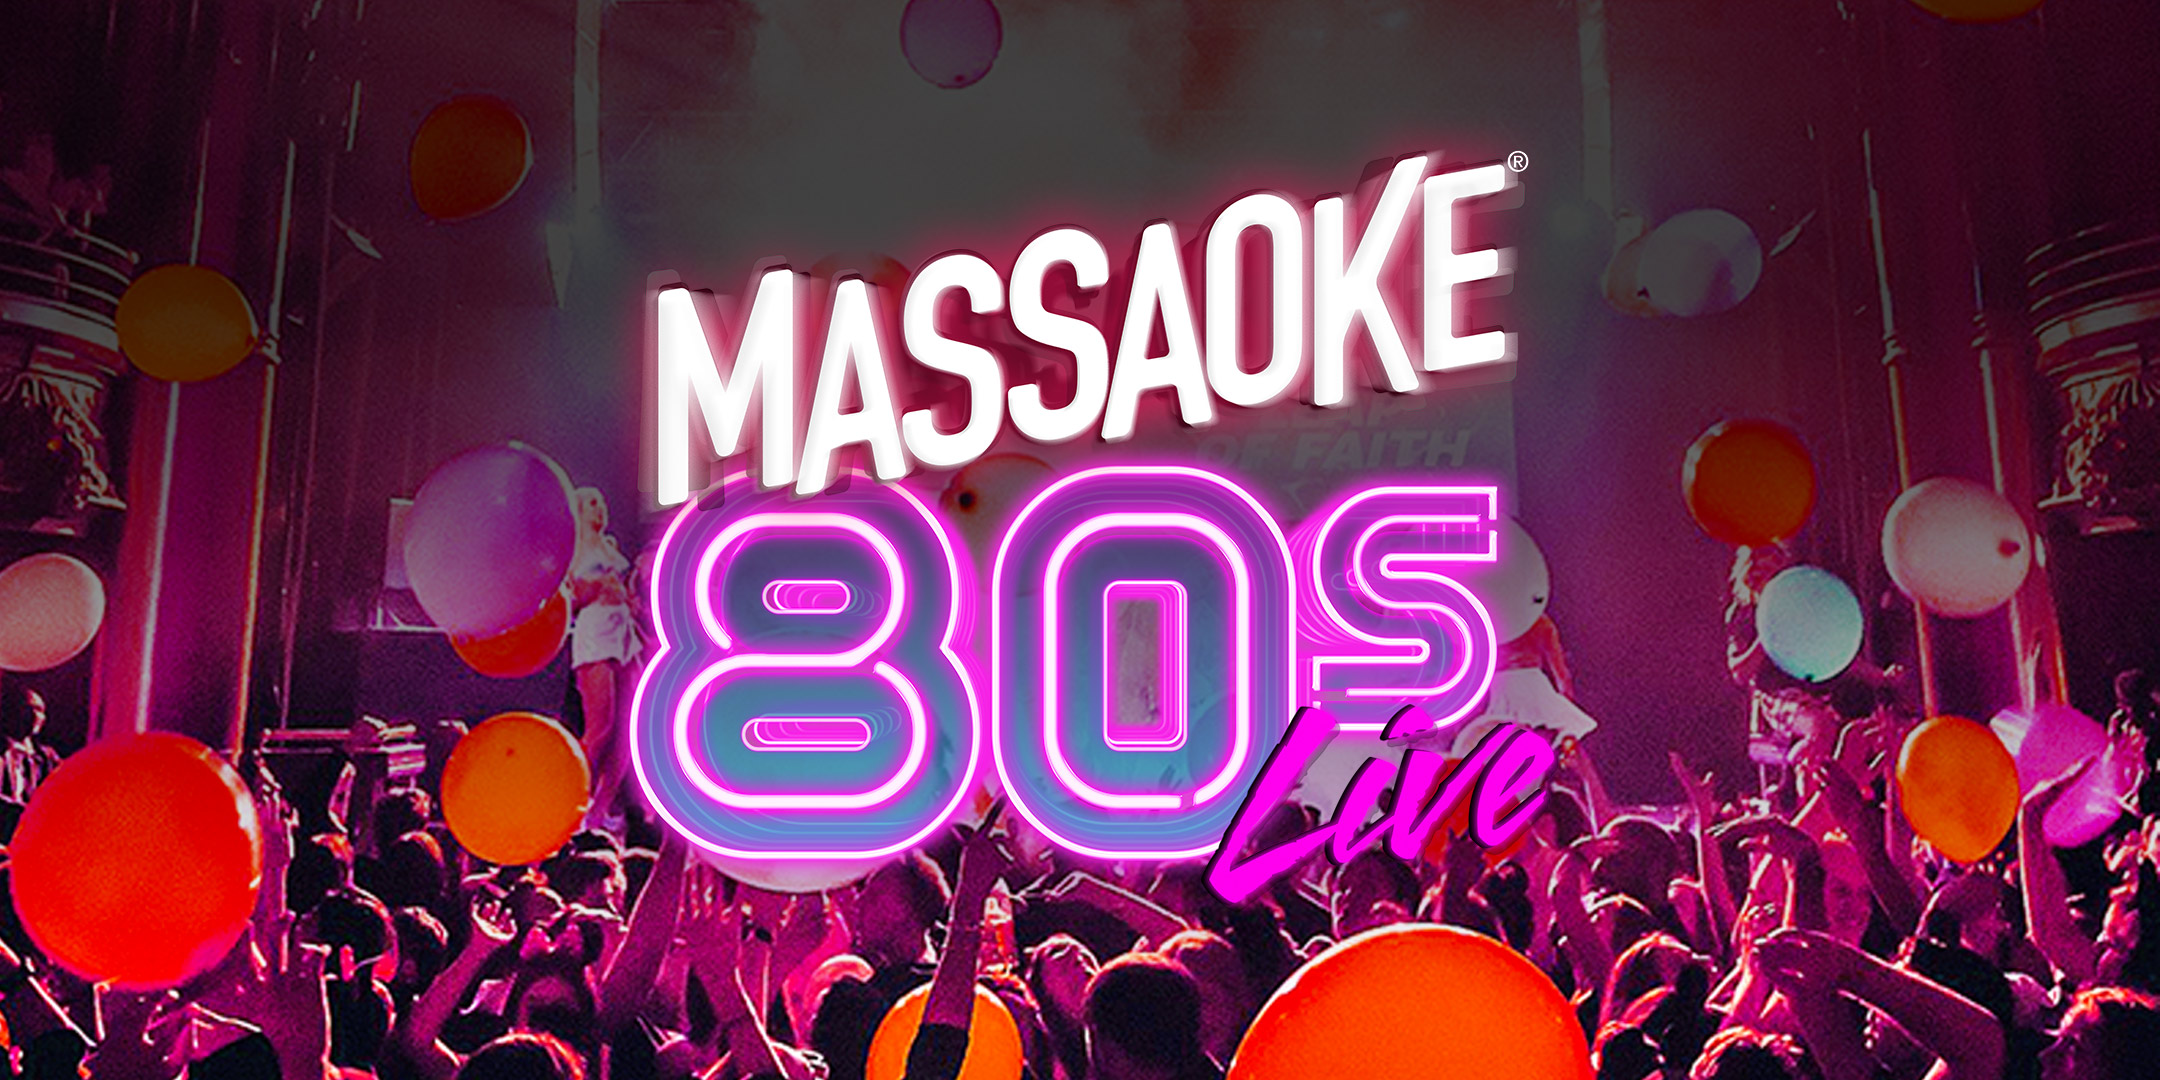 MASSAOKE! BRING THE SING to the 80s! – IT’S THE ULTIMATE LIVE SING-A-LONG